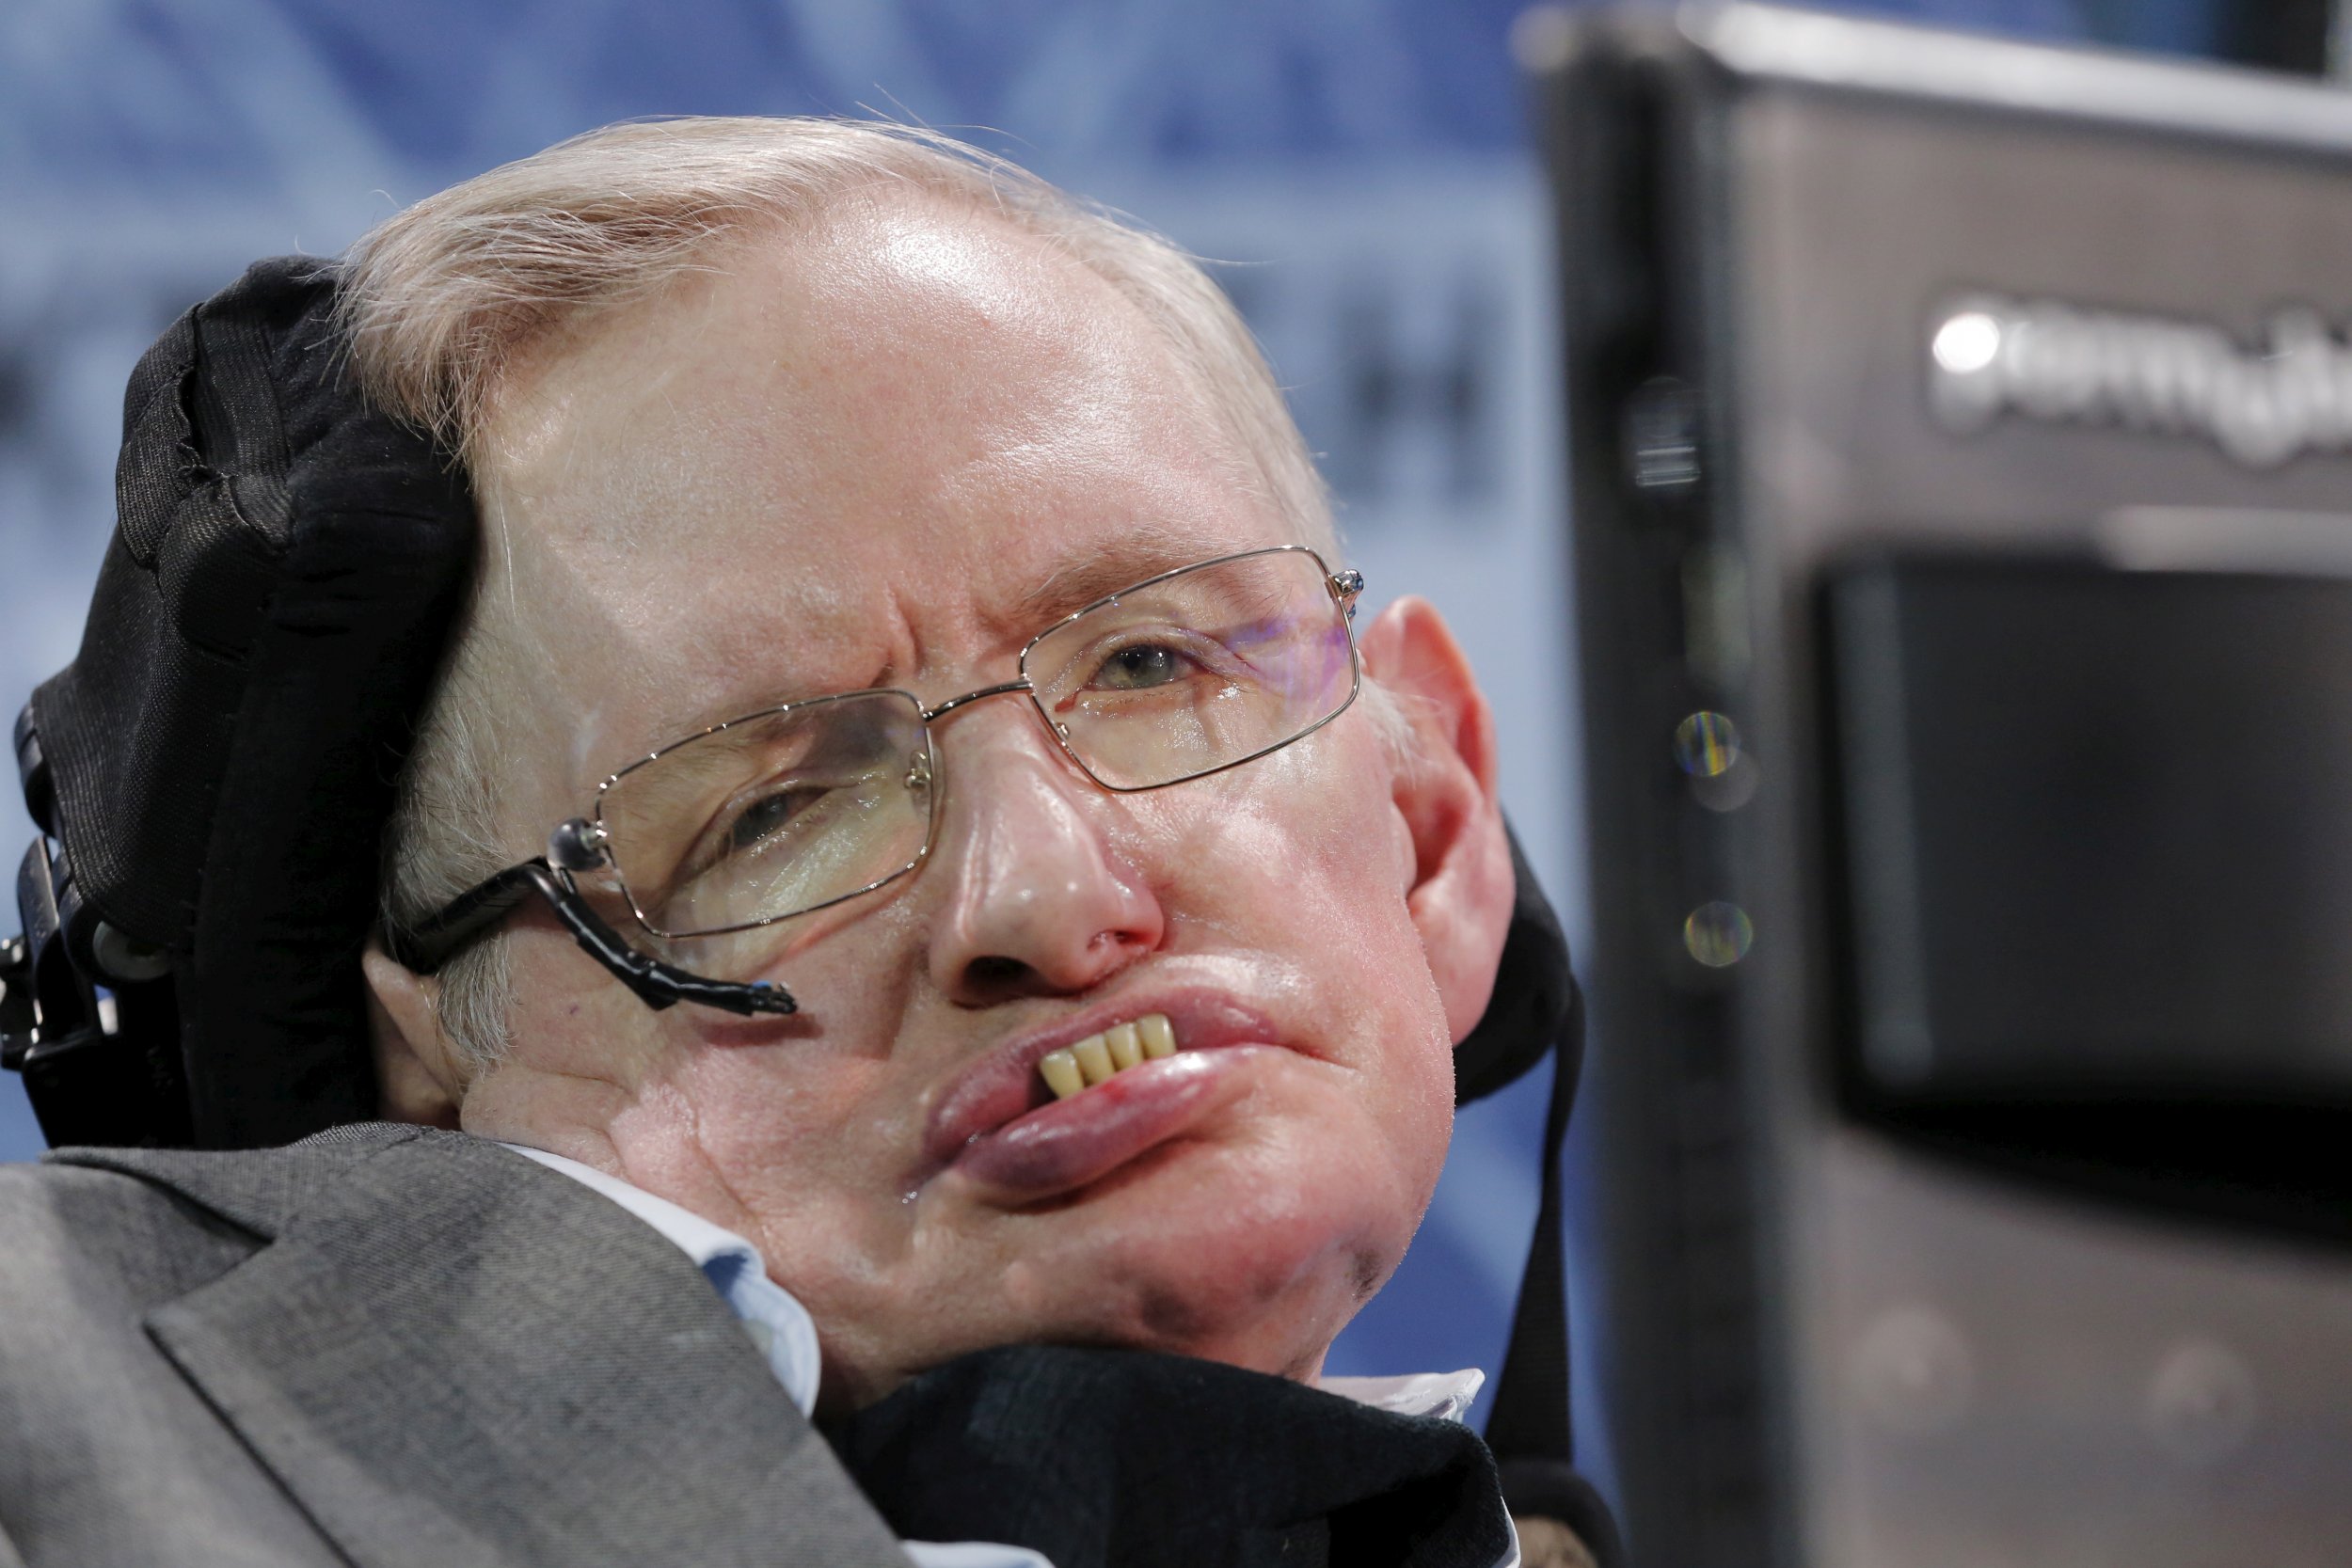 What is the highest IQ ever Stephen Hawking?